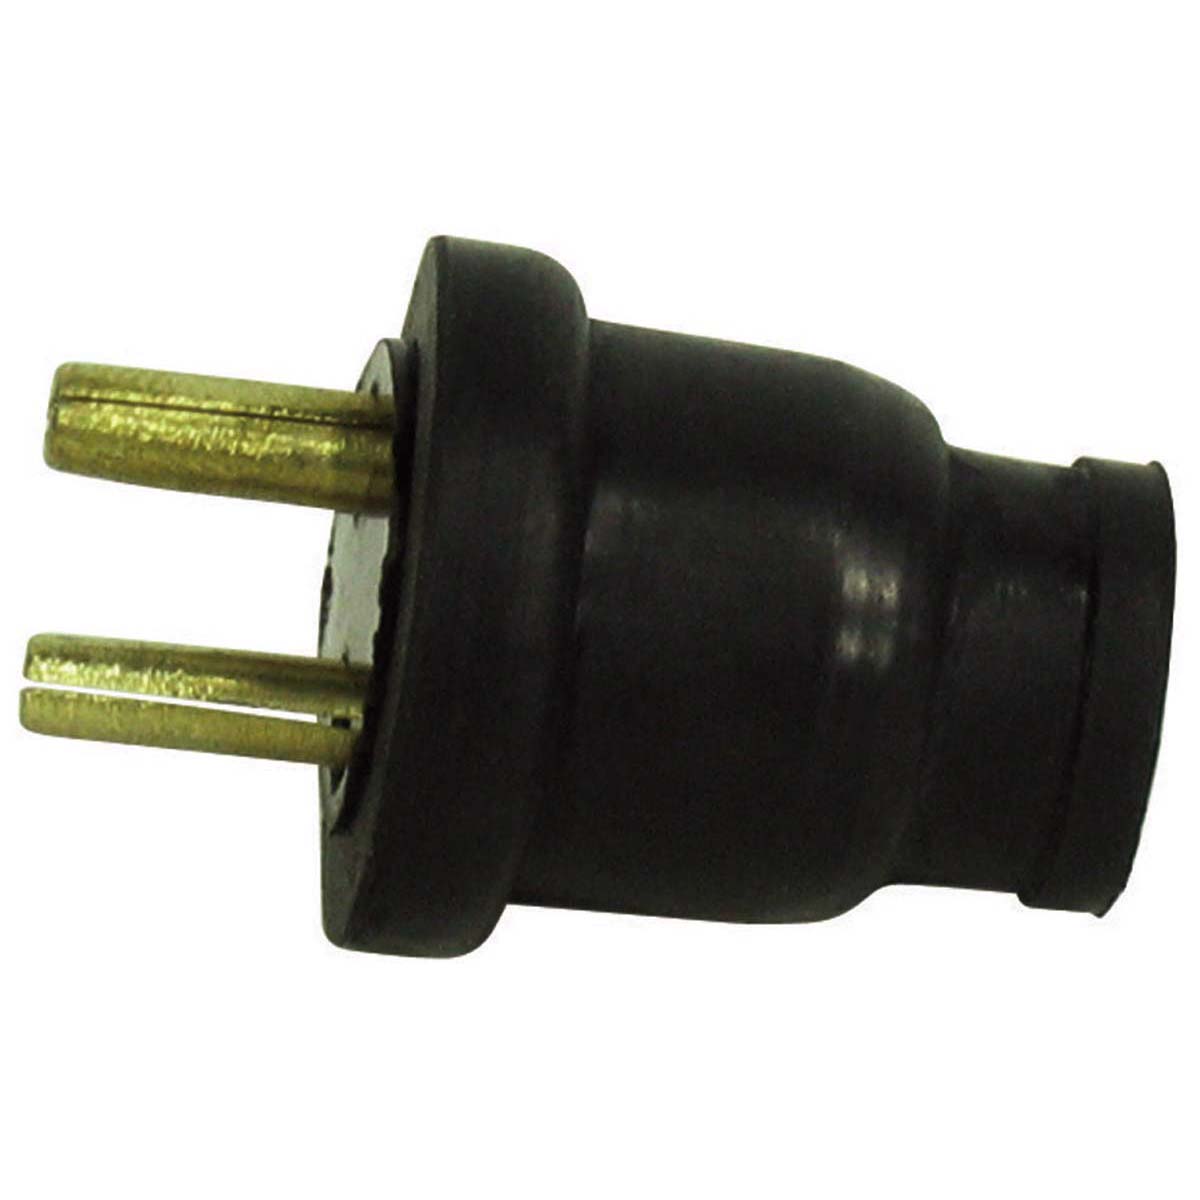 BLA 2 Pin Connector Plug to suit 116453